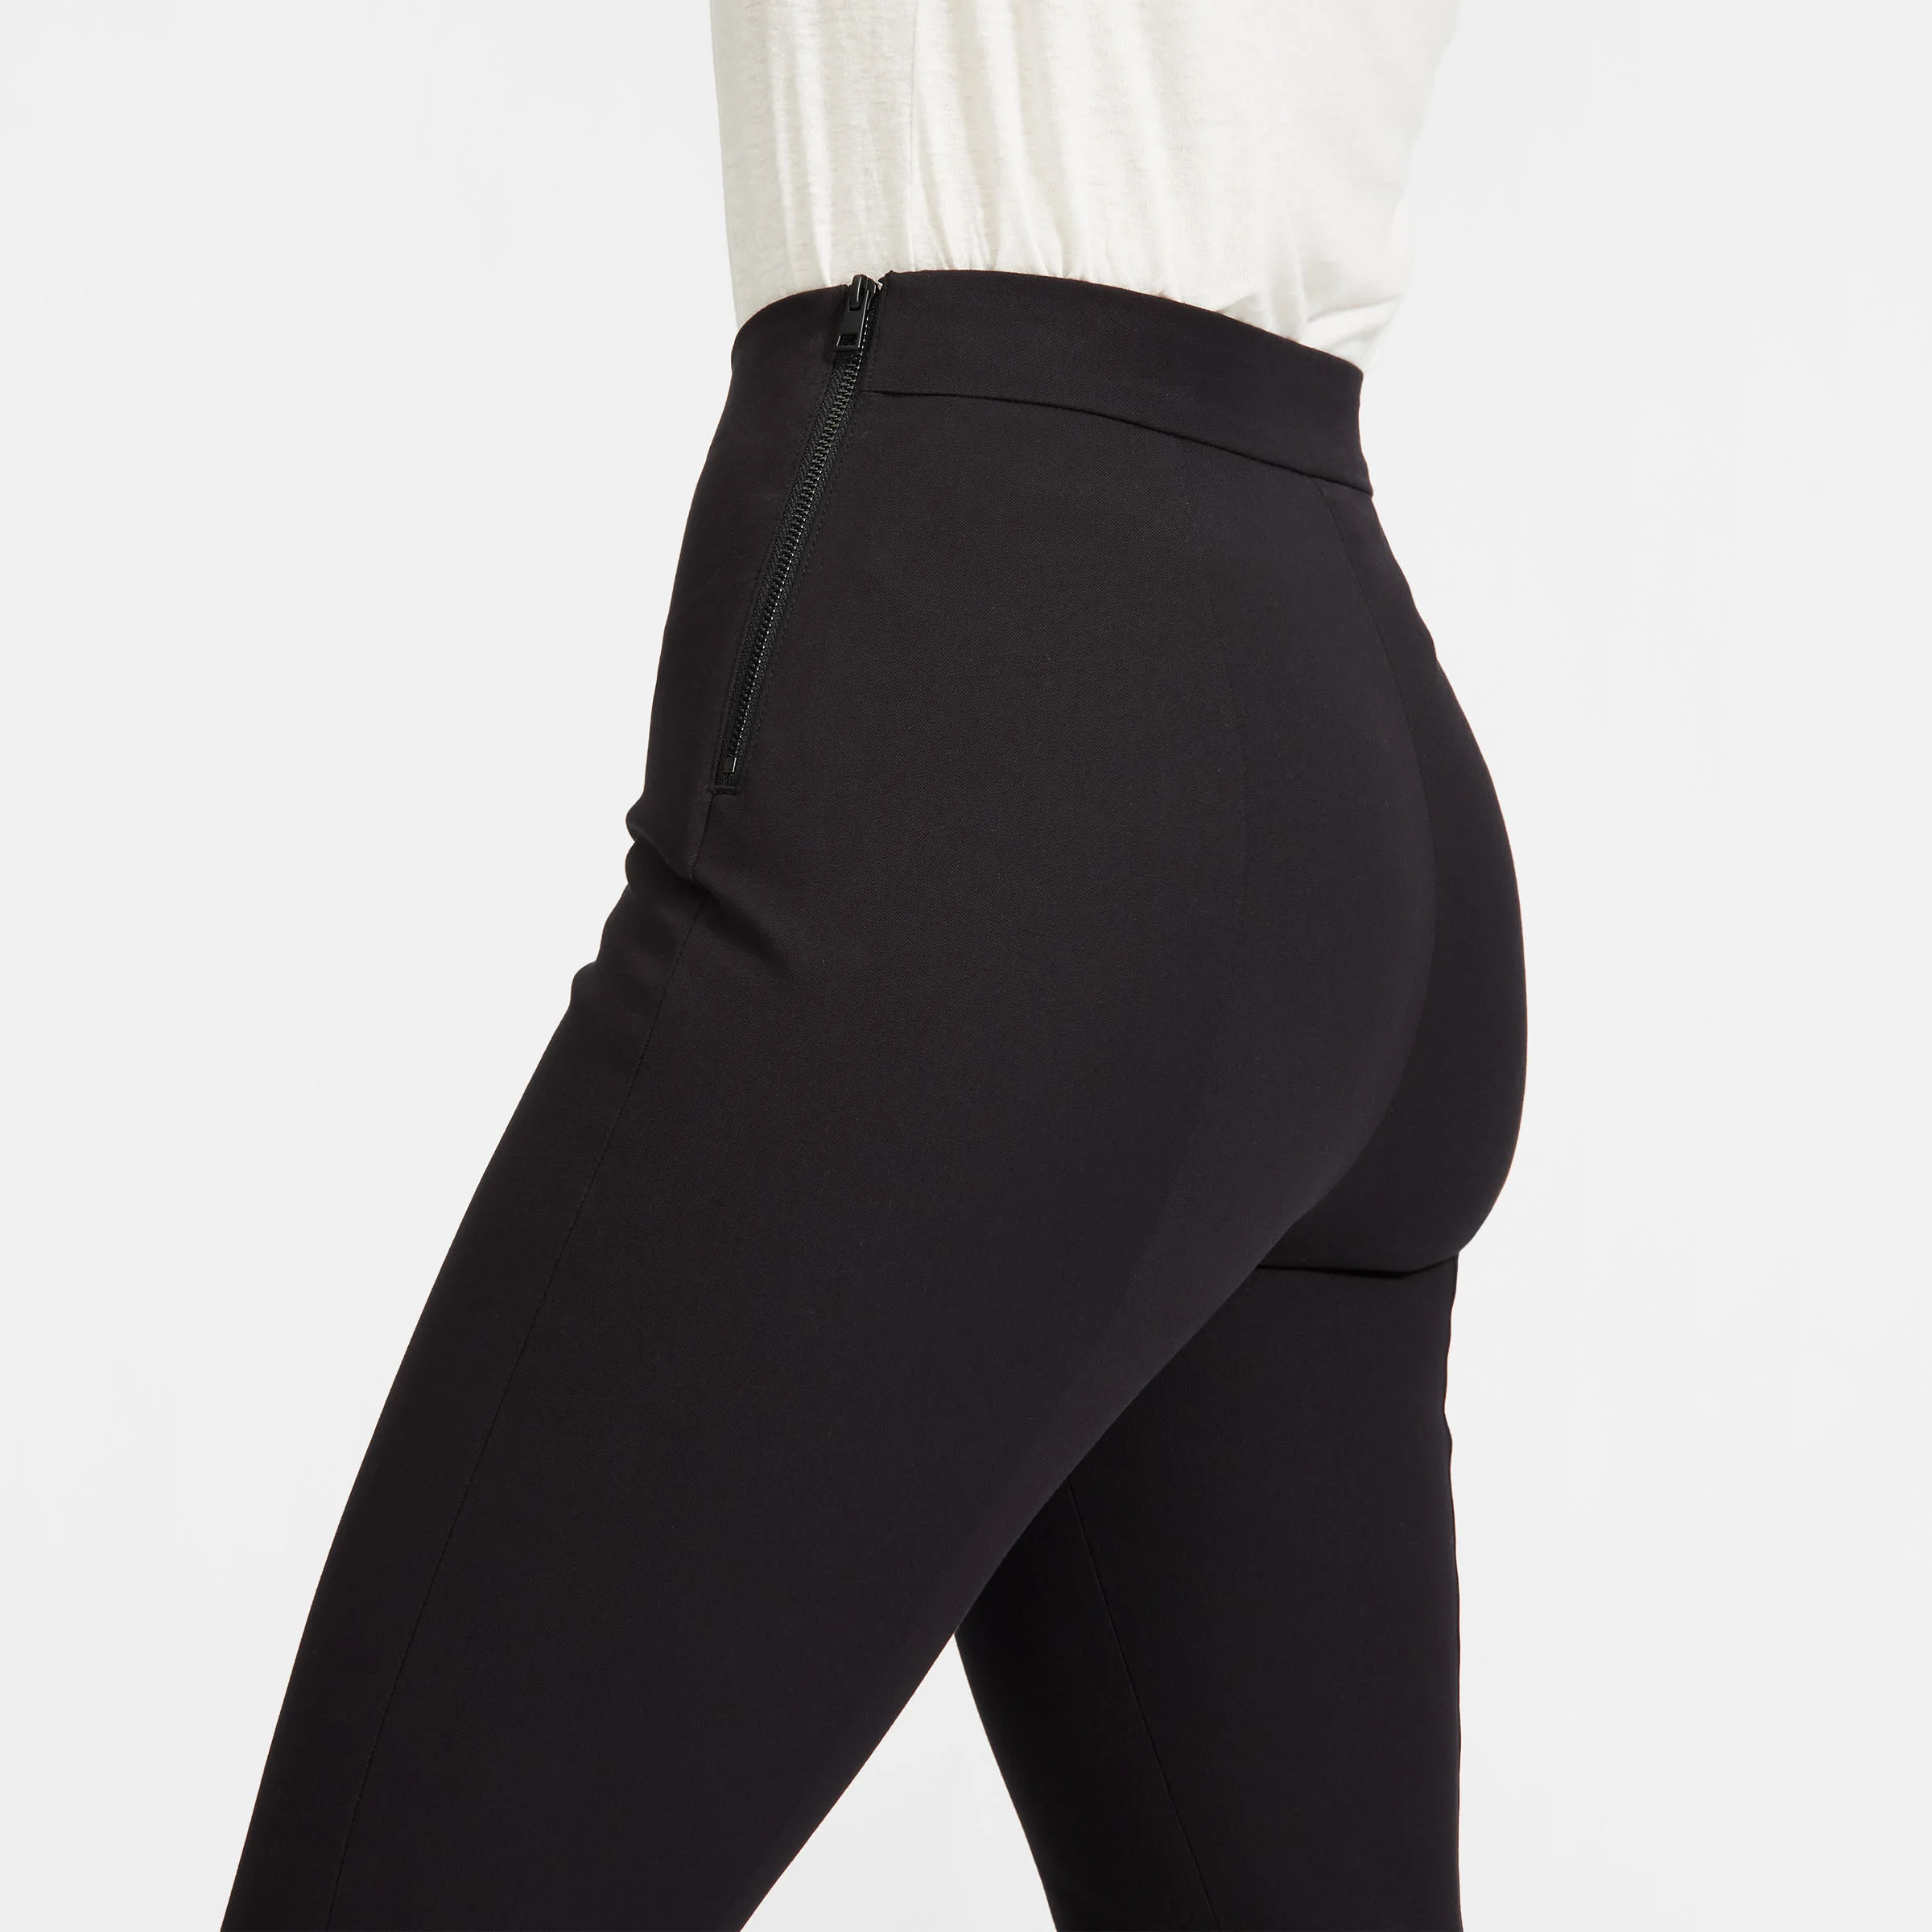 Everlane + The Curvy Side-Zip Stretch Cotton Pant